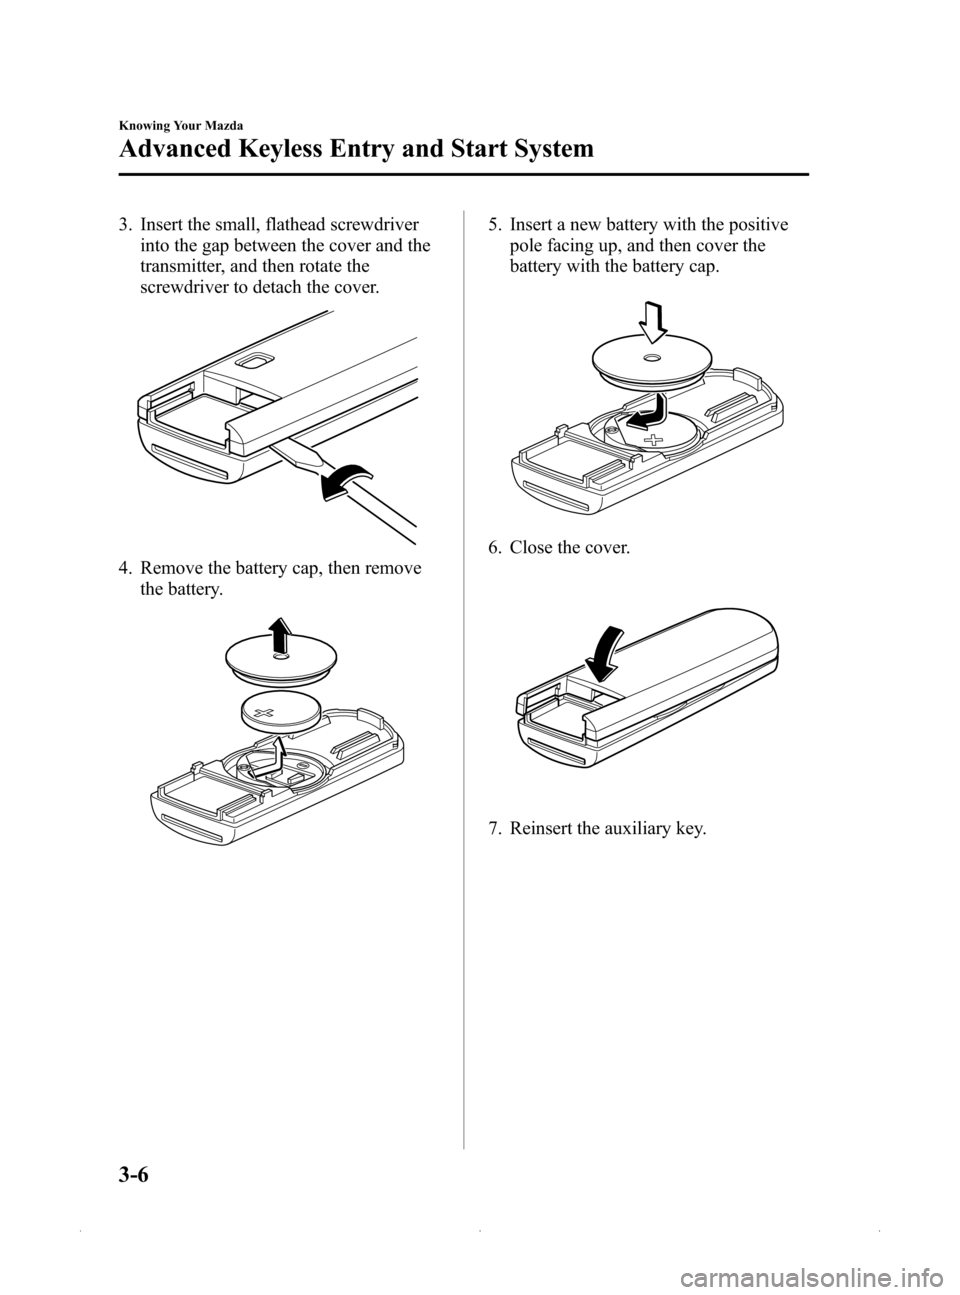 MAZDA MODEL MX-5 2015  Owners Manual (in English) Black plate (60,1)
3. Insert the small, flathead screwdriverinto the gap between the cover and the
transmitter, and then rotate the
screwdriver to detach the cover.
4. Remove the battery cap, then rem